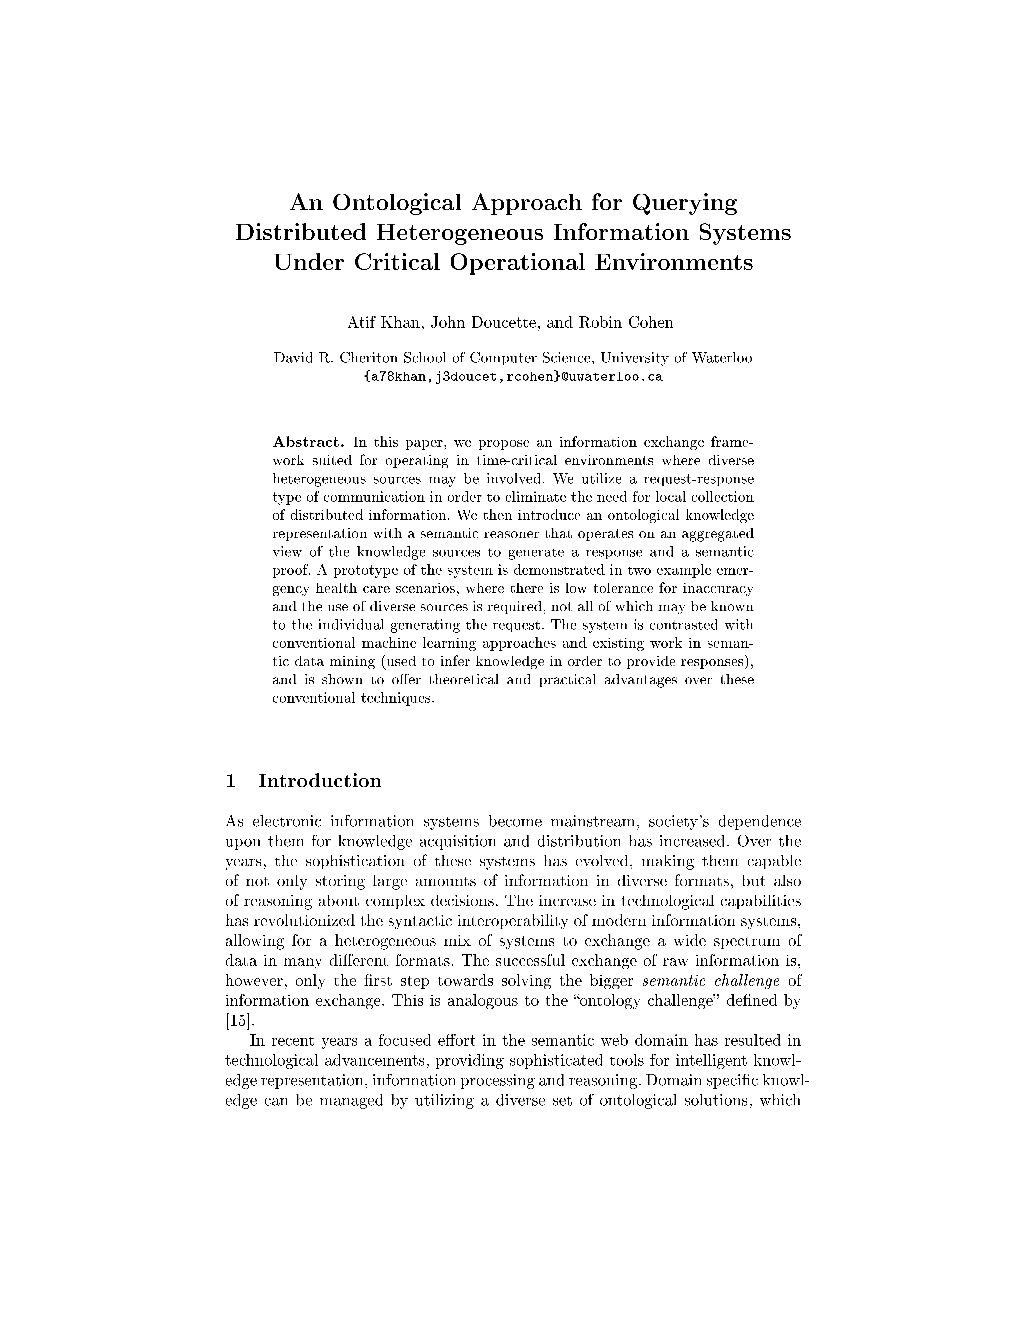 An Ontological Approach for Querying Distributed Heterogeneous Information Systems Under Critical Operational Environments